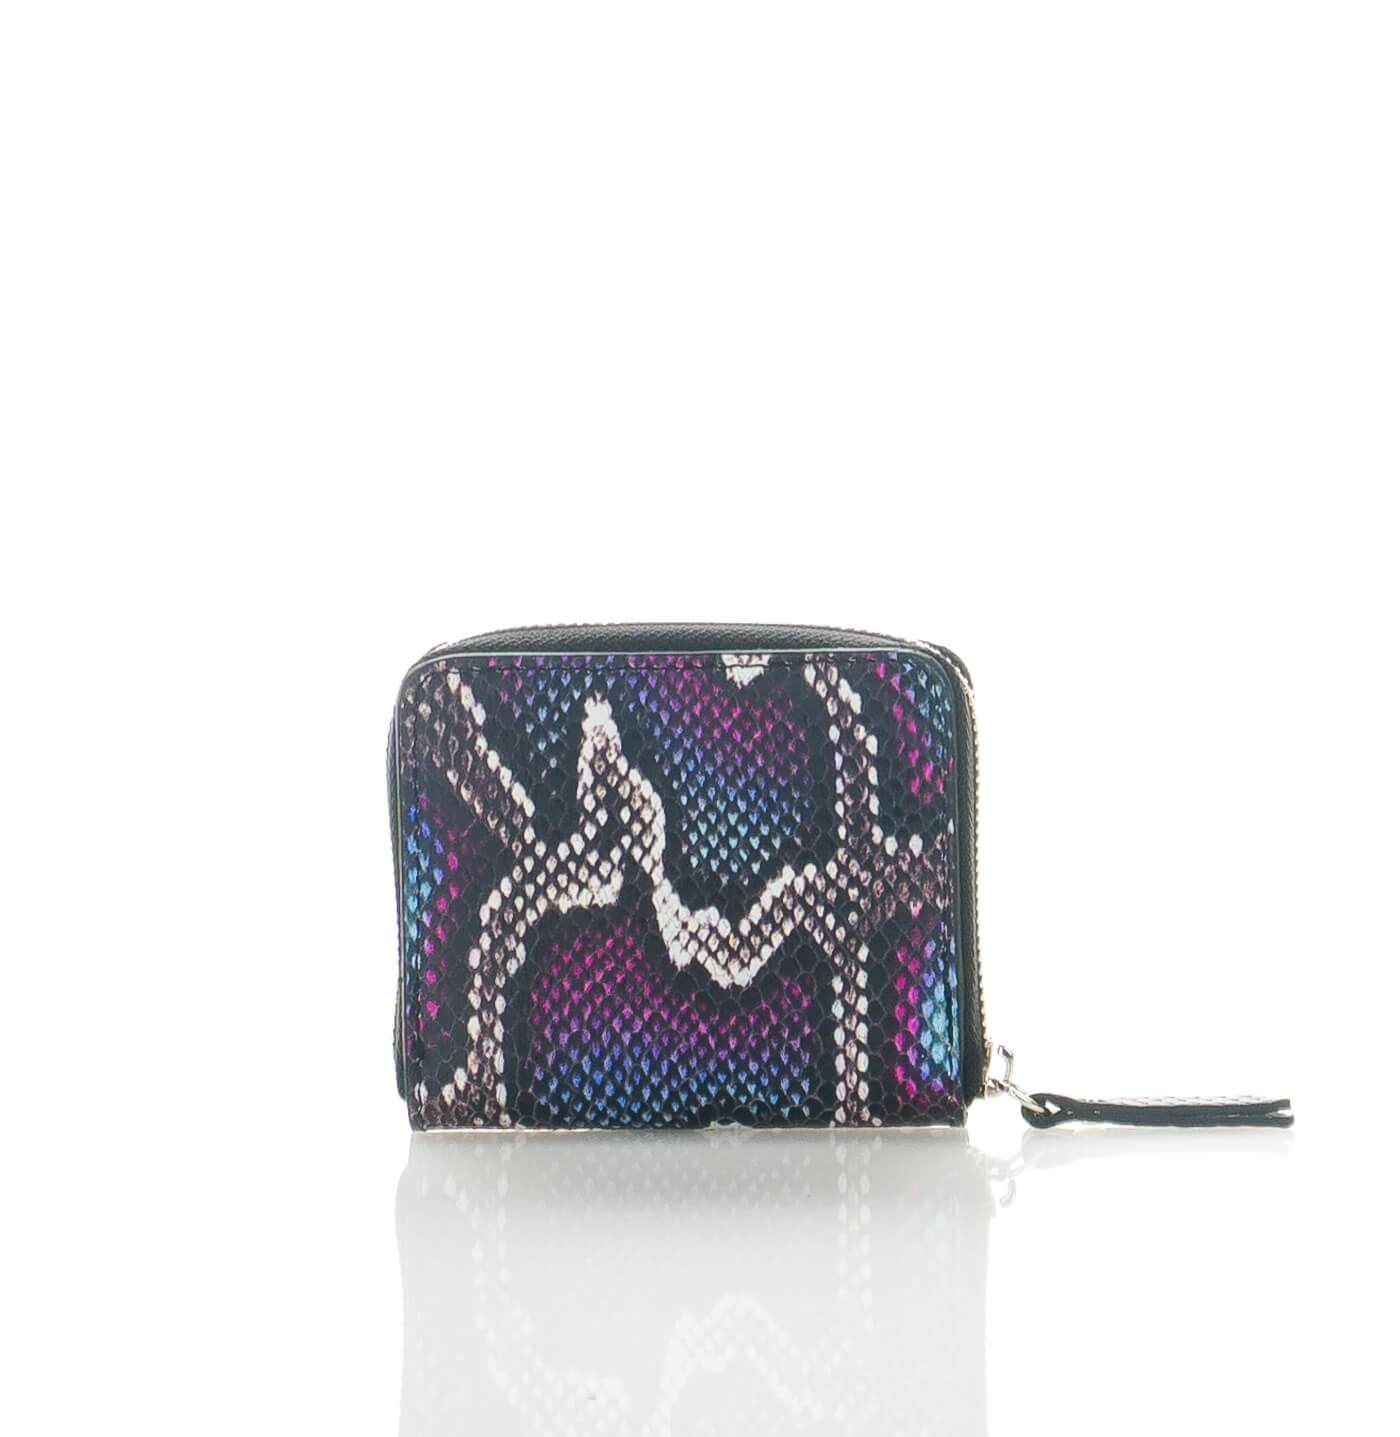 Lavanda-1 Small Wallet Python Print with Zip Opening - BLUE